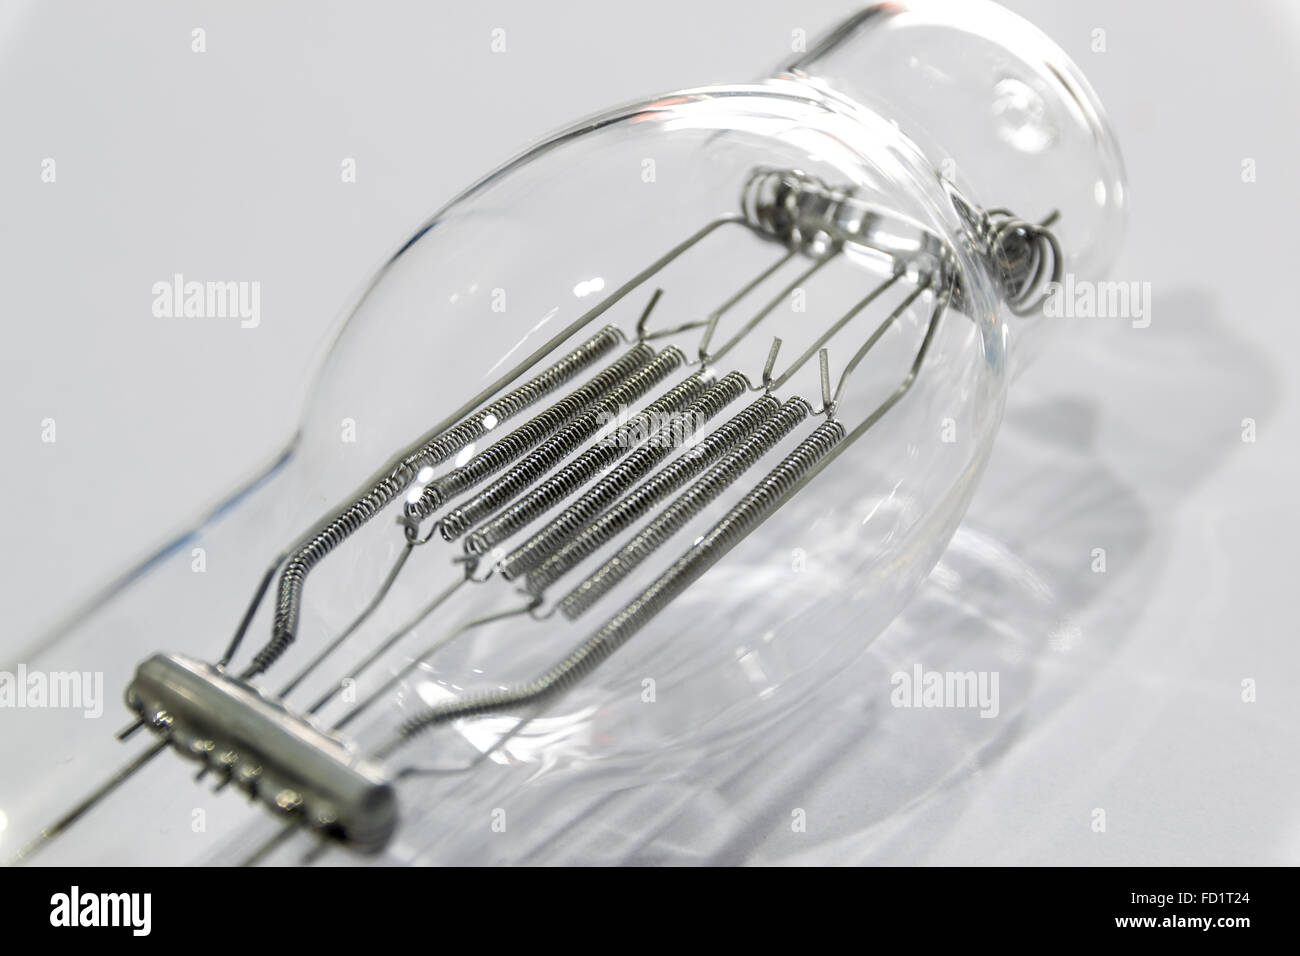 Incandescent lamp emitting light as a result of being heated. Stock Photo